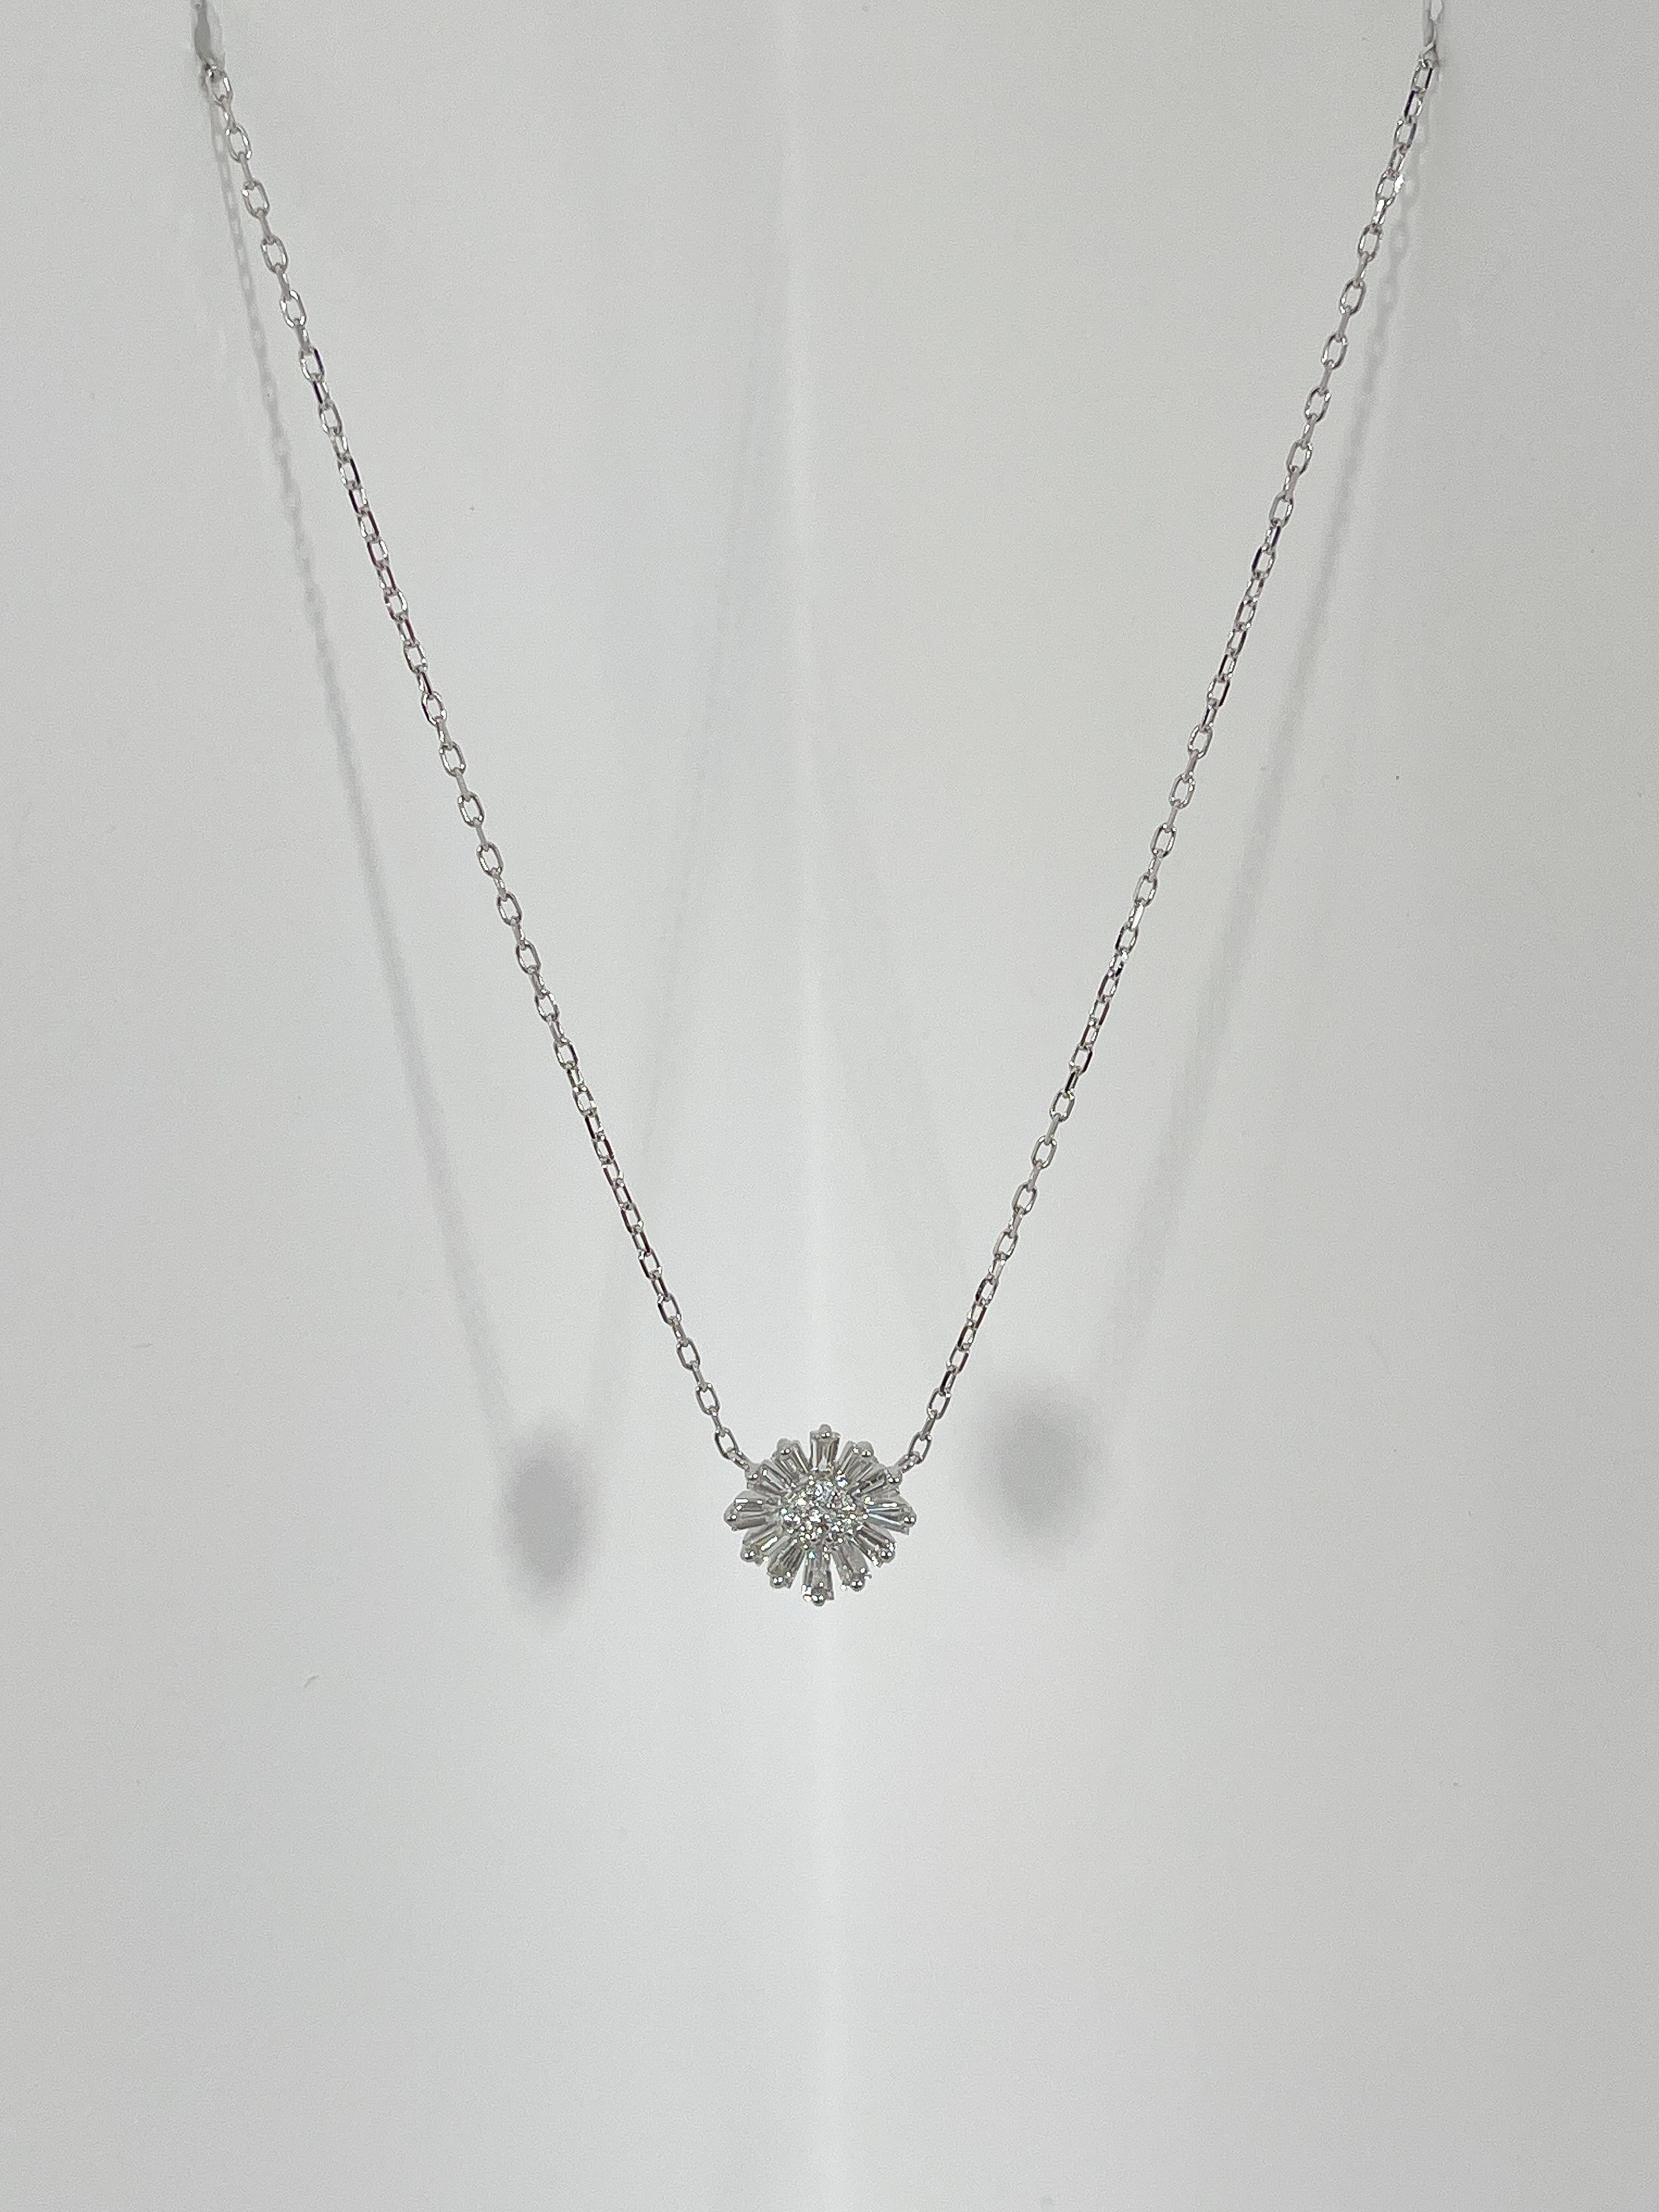 Zeghani 14k white gold .39 CTW diamond flower pendant. The diamonds in the pendant are round and baguette cut, has an O ring clasp to open and close, the length is 18 inches, pendant has a width of 10 mm, and has a total weight of 1.9 grams.